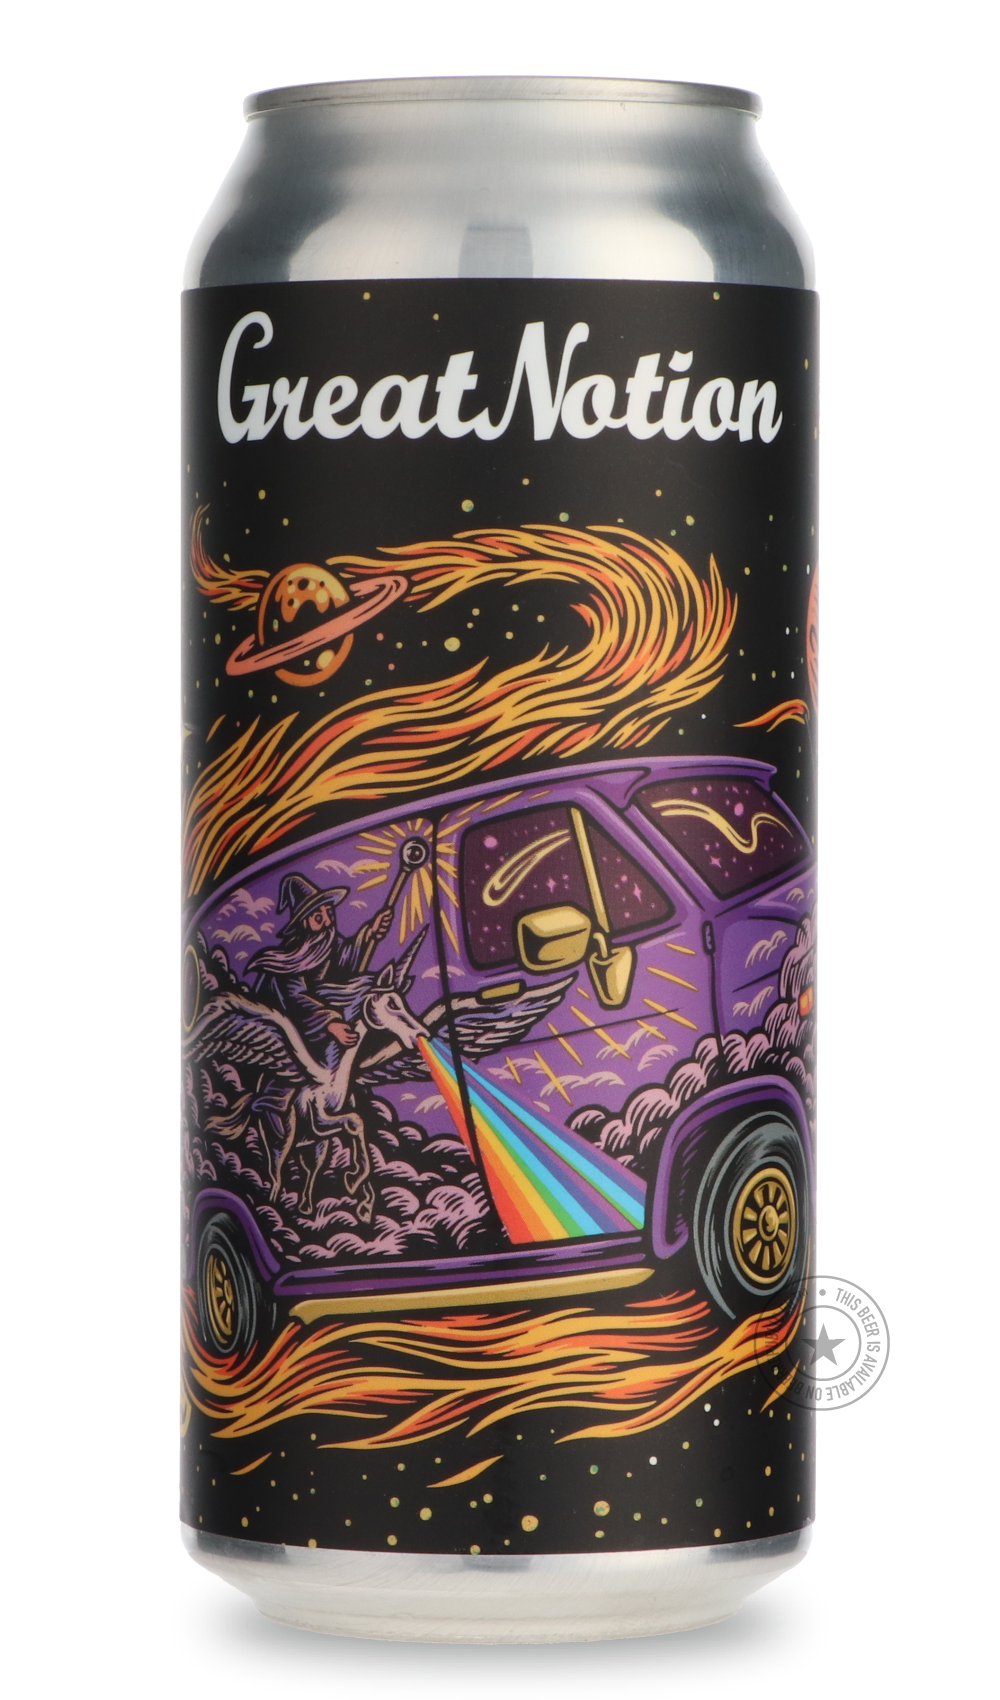 -Great Notion- Van Beer-IPA- Only @ Beer Republic - The best online beer store for American & Canadian craft beer - Buy beer online from the USA and Canada - Bier online kopen - Amerikaans bier kopen - Craft beer store - Craft beer kopen - Amerikanisch bier kaufen - Bier online kaufen - Acheter biere online - IPA - Stout - Porter - New England IPA - Hazy IPA - Imperial Stout - Barrel Aged - Barrel Aged Imperial Stout - Brown - Dark beer - Blond - Blonde - Pilsner - Lager - Wheat - Weizen - Amber - Barley Wi